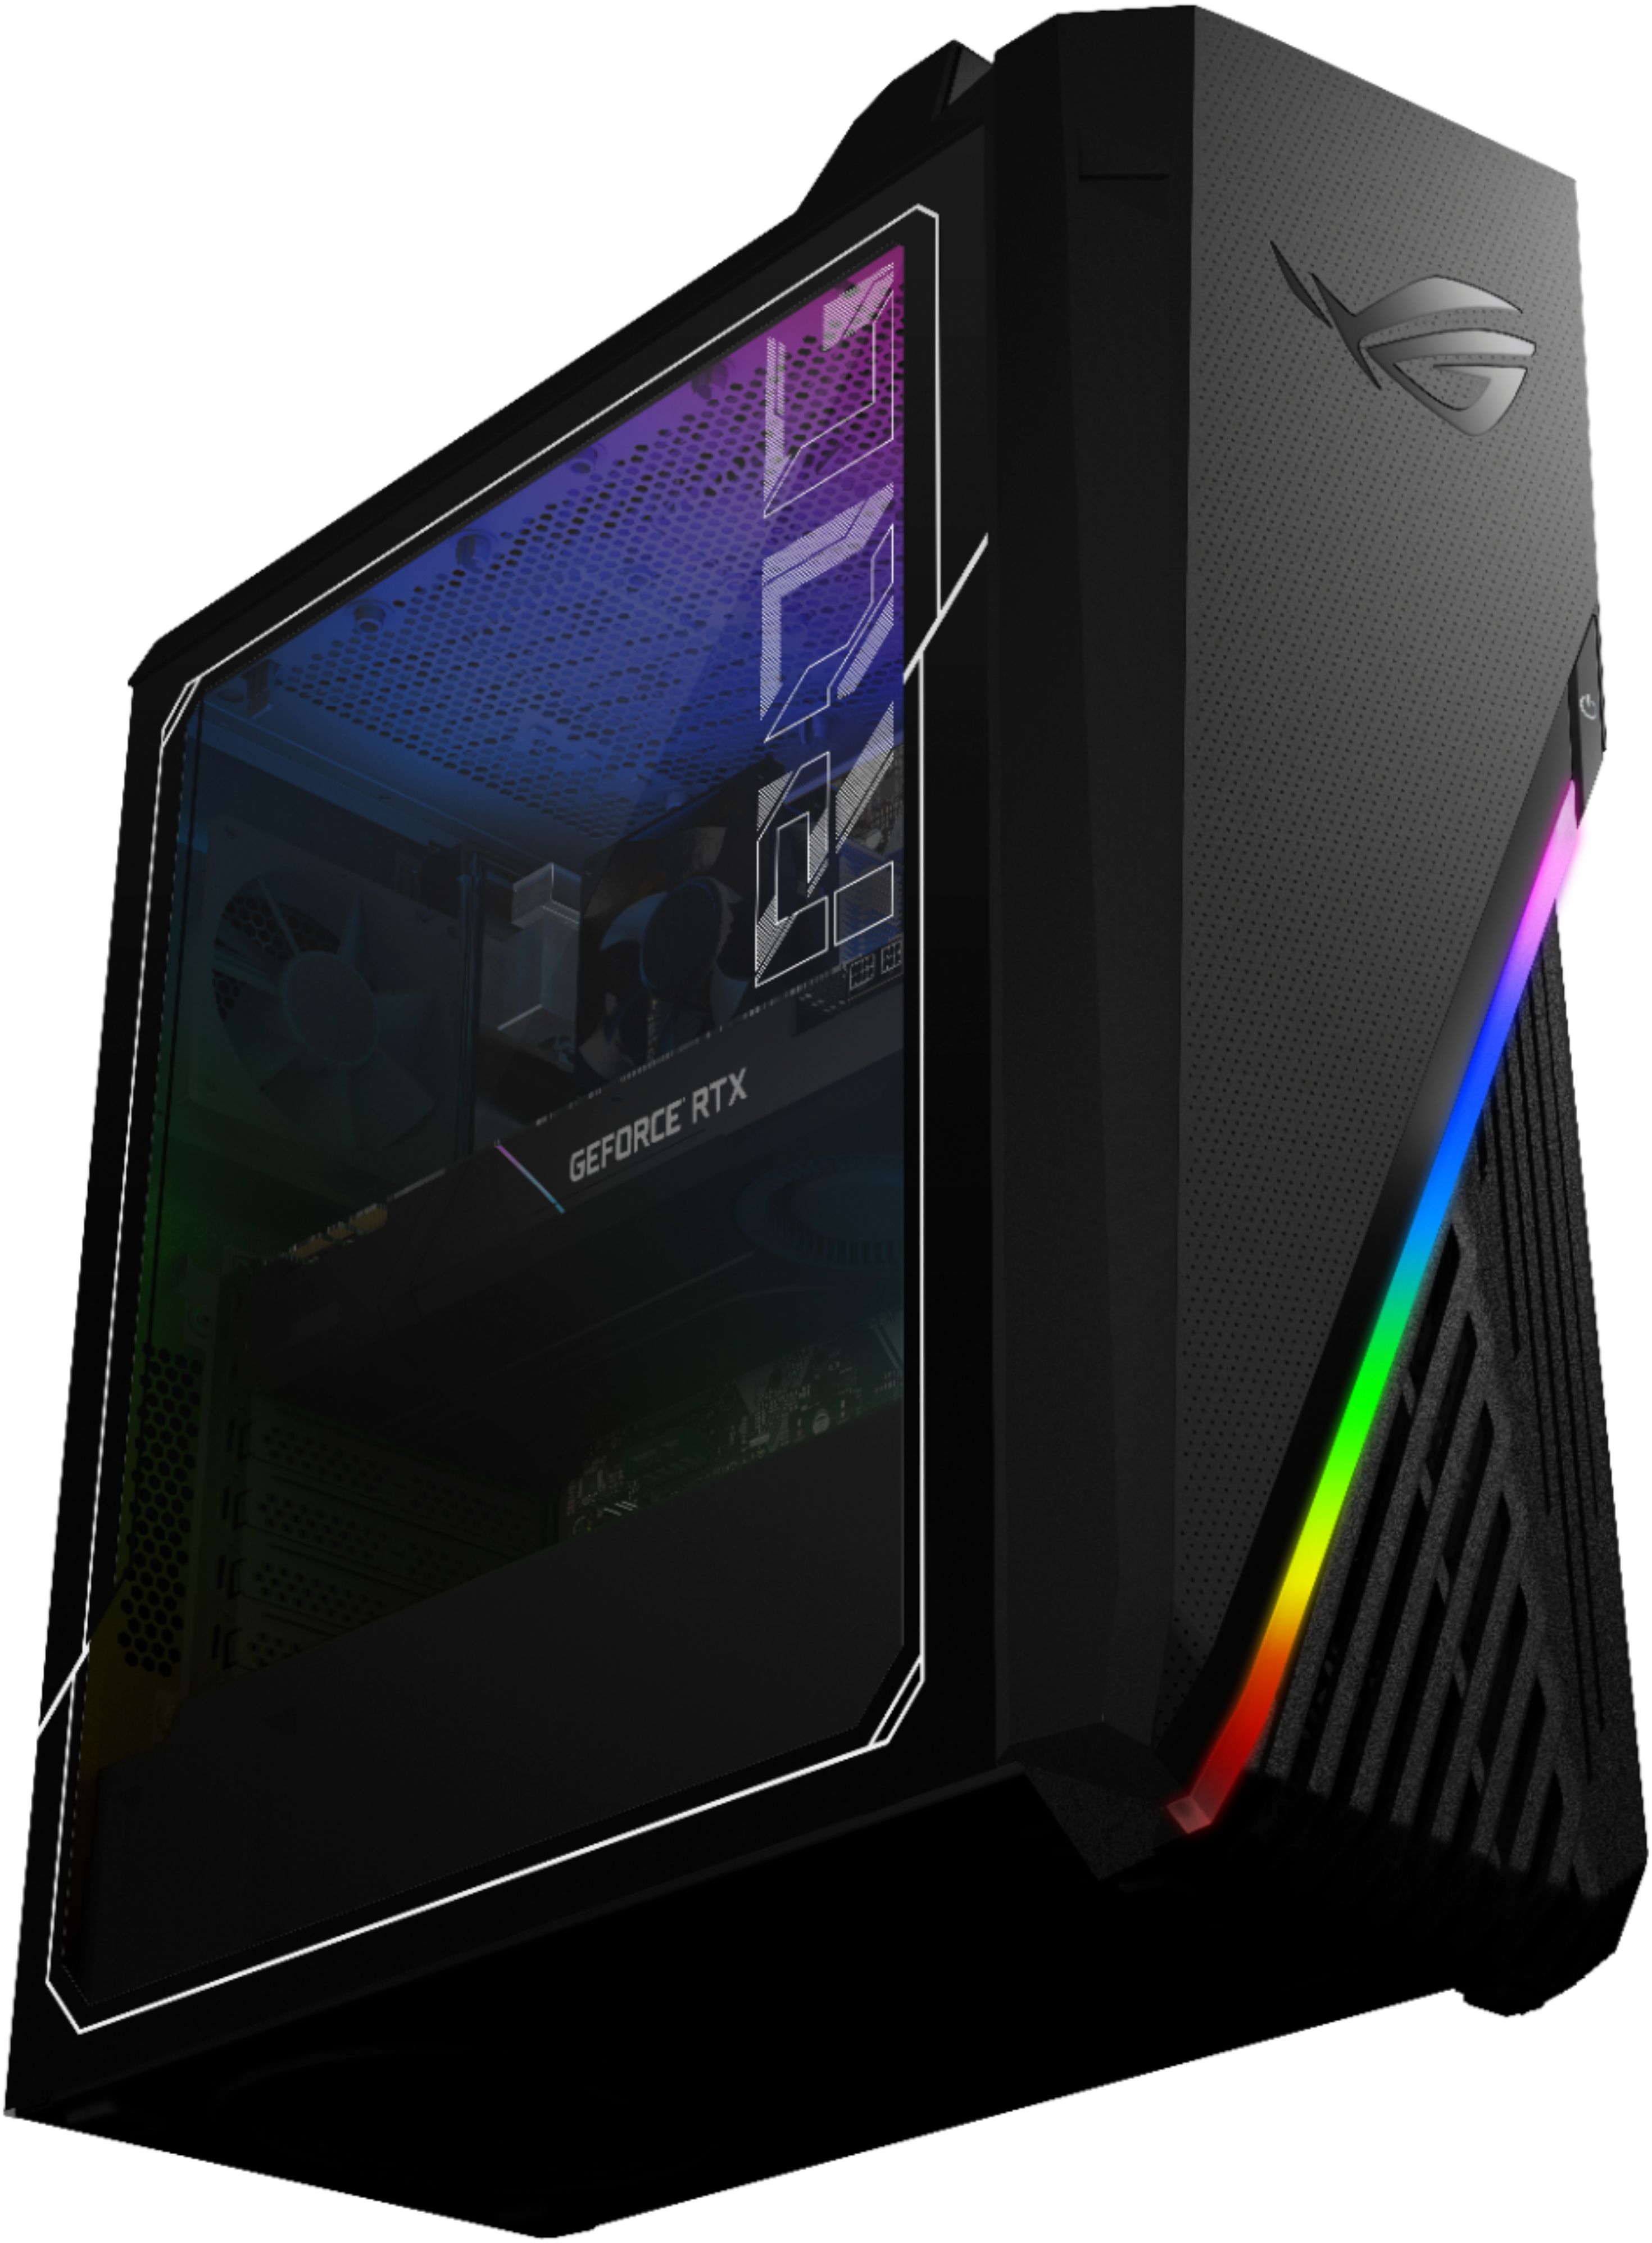 ASUS Together with Windows 10 Reinvigorates PC Gaming at ROG Unleashed